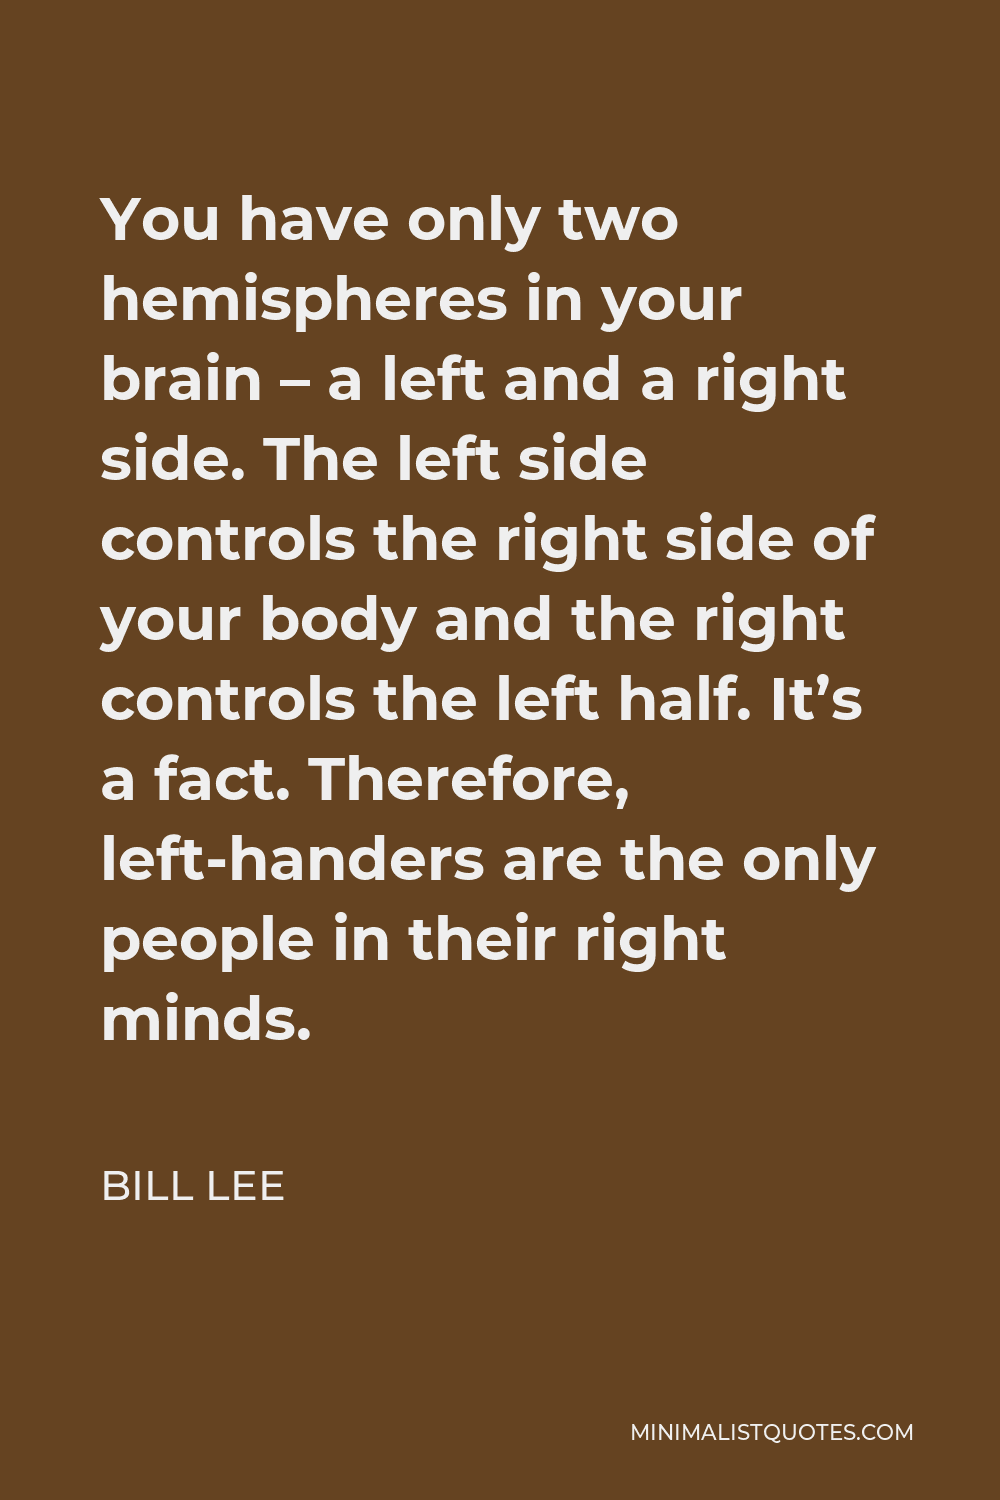 Bill Lee Quote - You have only two hemispheres in your brain – a left and a right side. The left side controls the right side of your body and the right controls the left half. It’s a fact. Therefore, left-handers are the only people in their right minds.